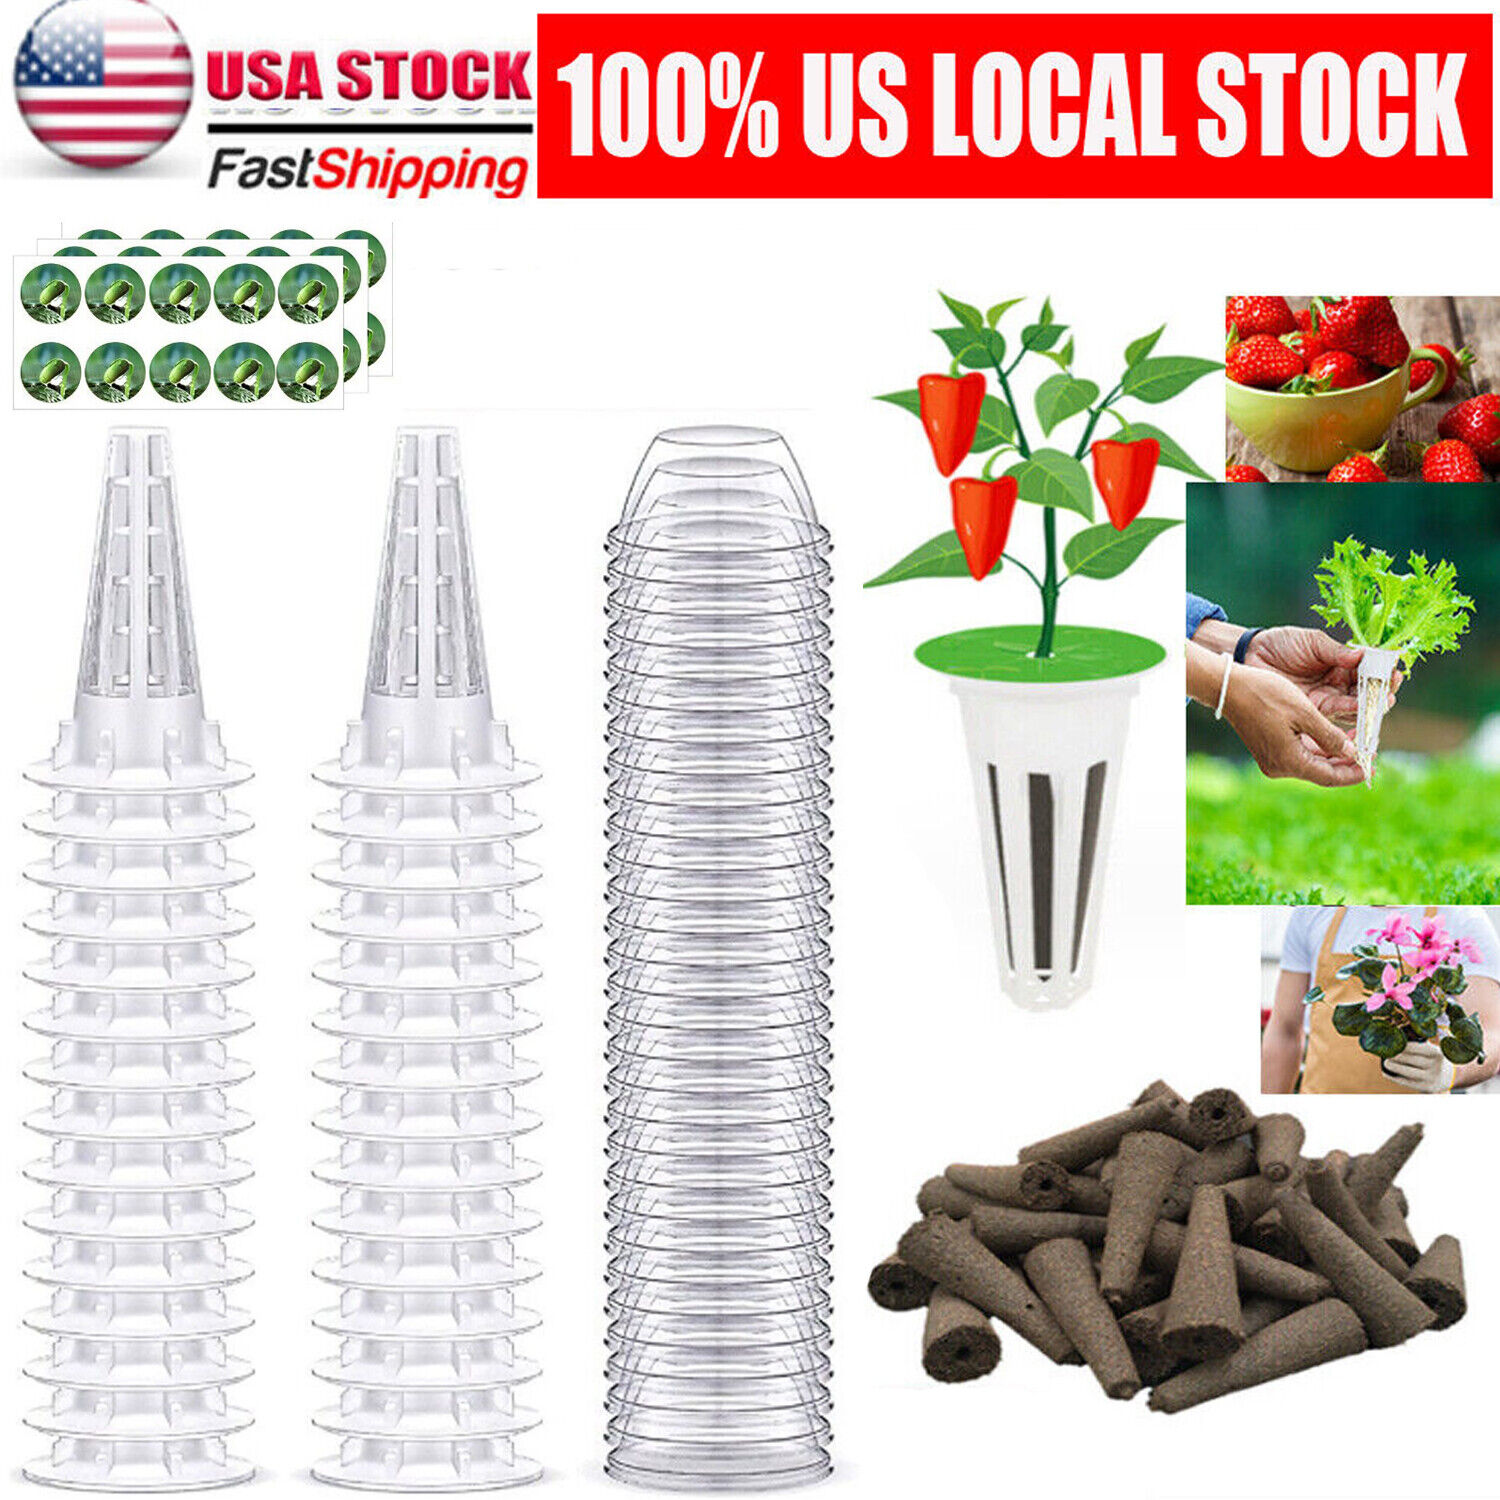 120pcs Seed Pod Kit Hydroponics Garden Accessories Grow Anything Kit Sponge Dome